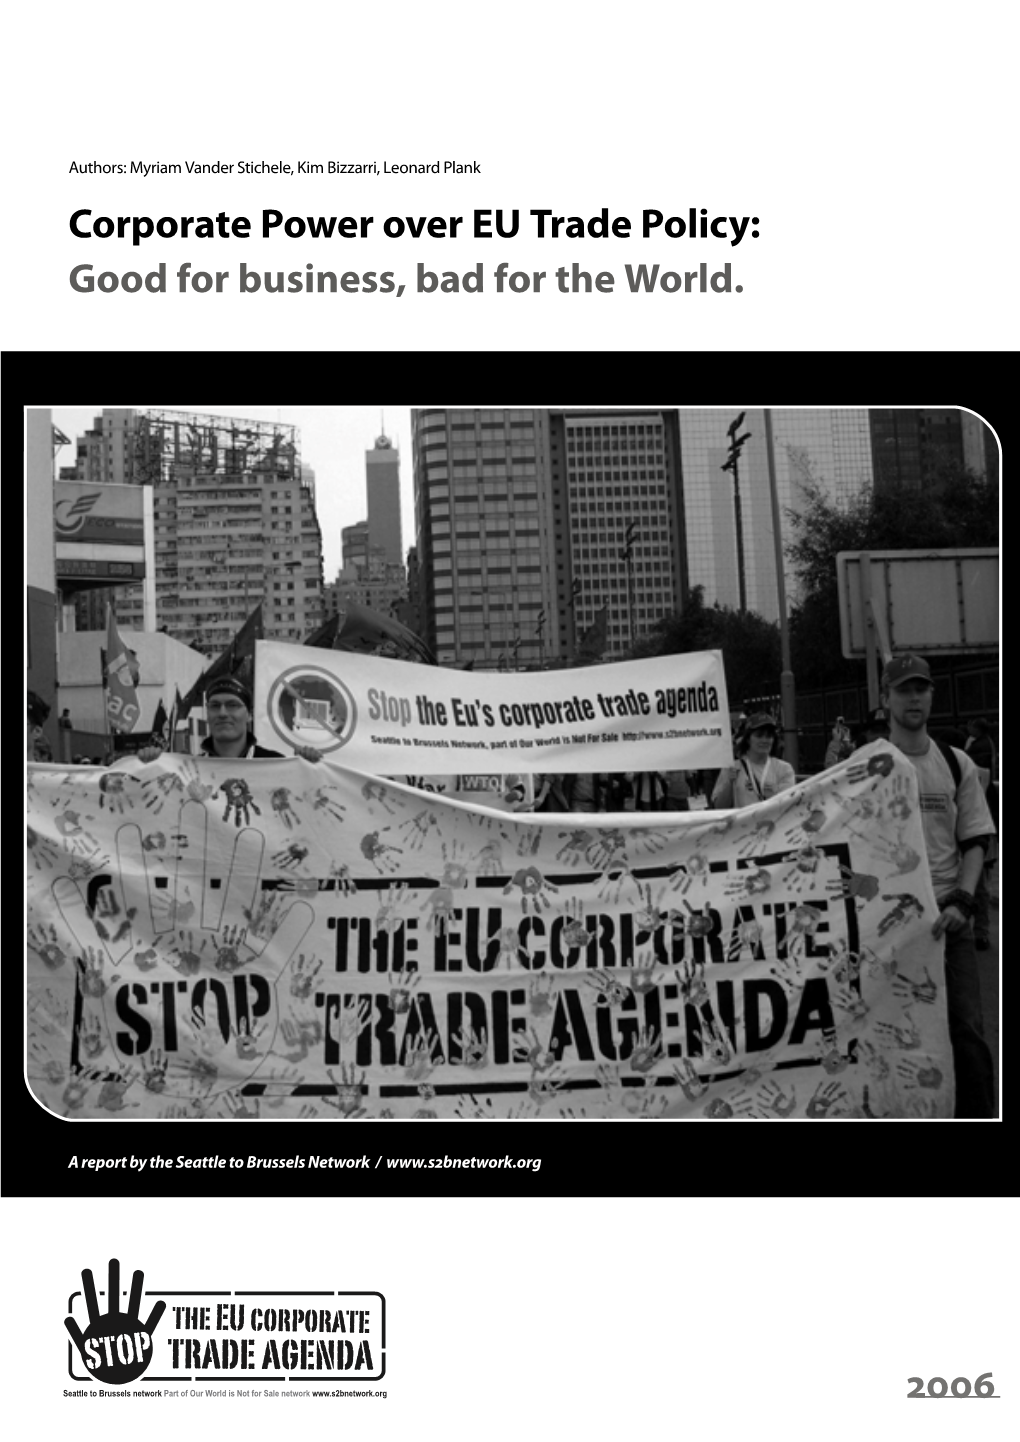 2006 Corporate Power Over EU Trade Policy: Good for Business, Bad for the World